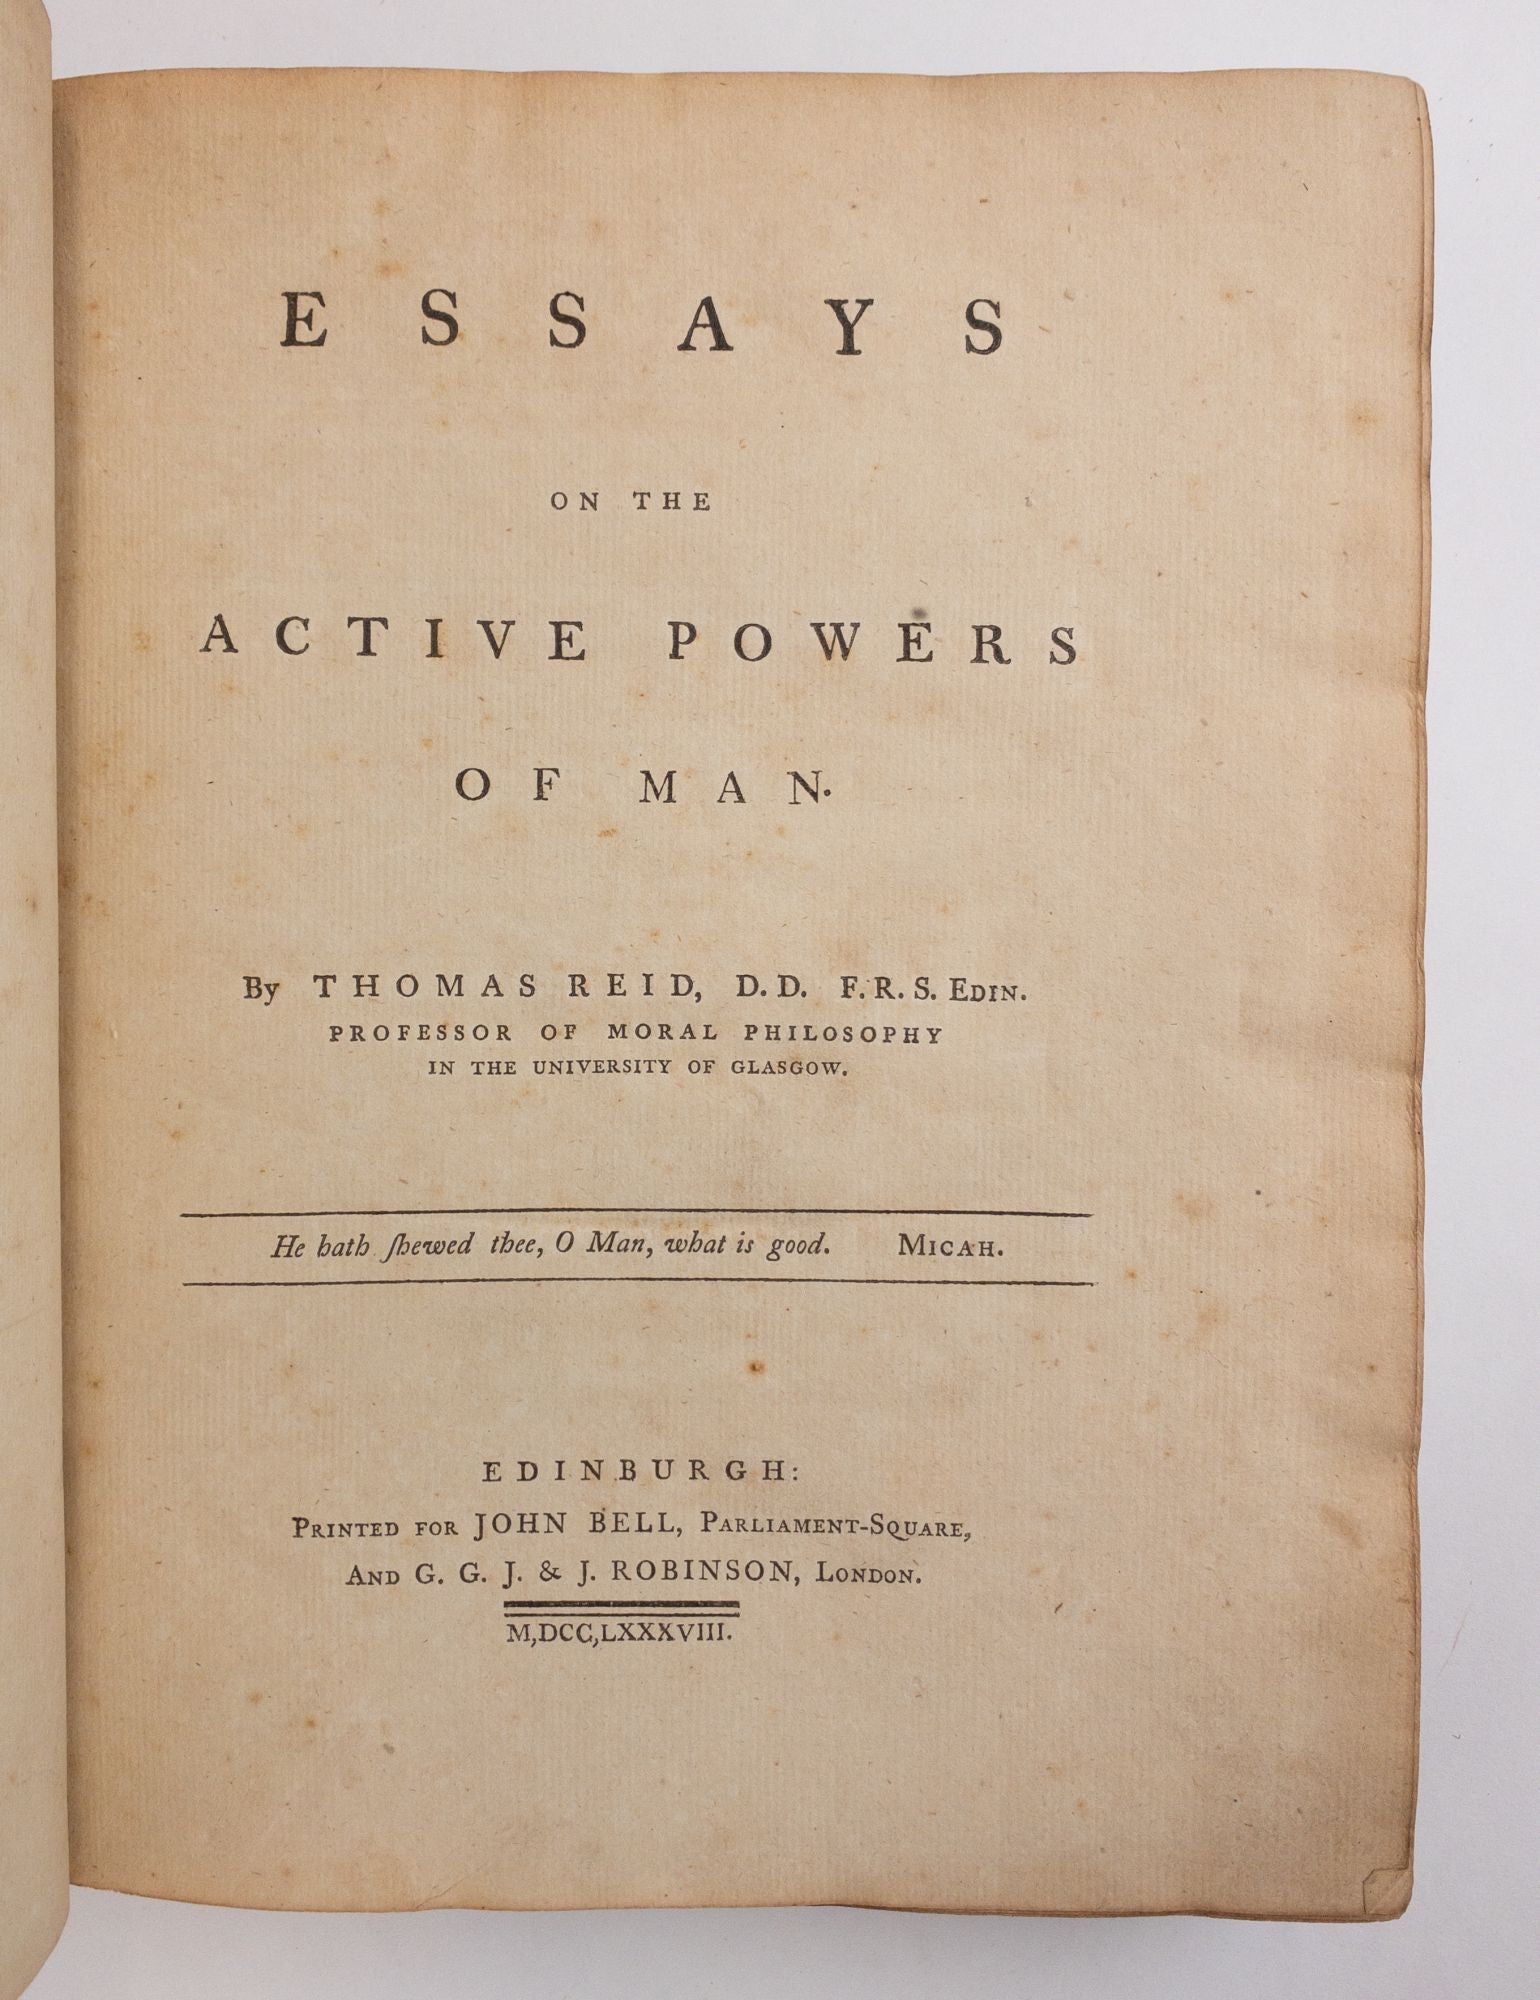 Product Image for ESSAYS ON THE ACTIVE POWERS OF MAN